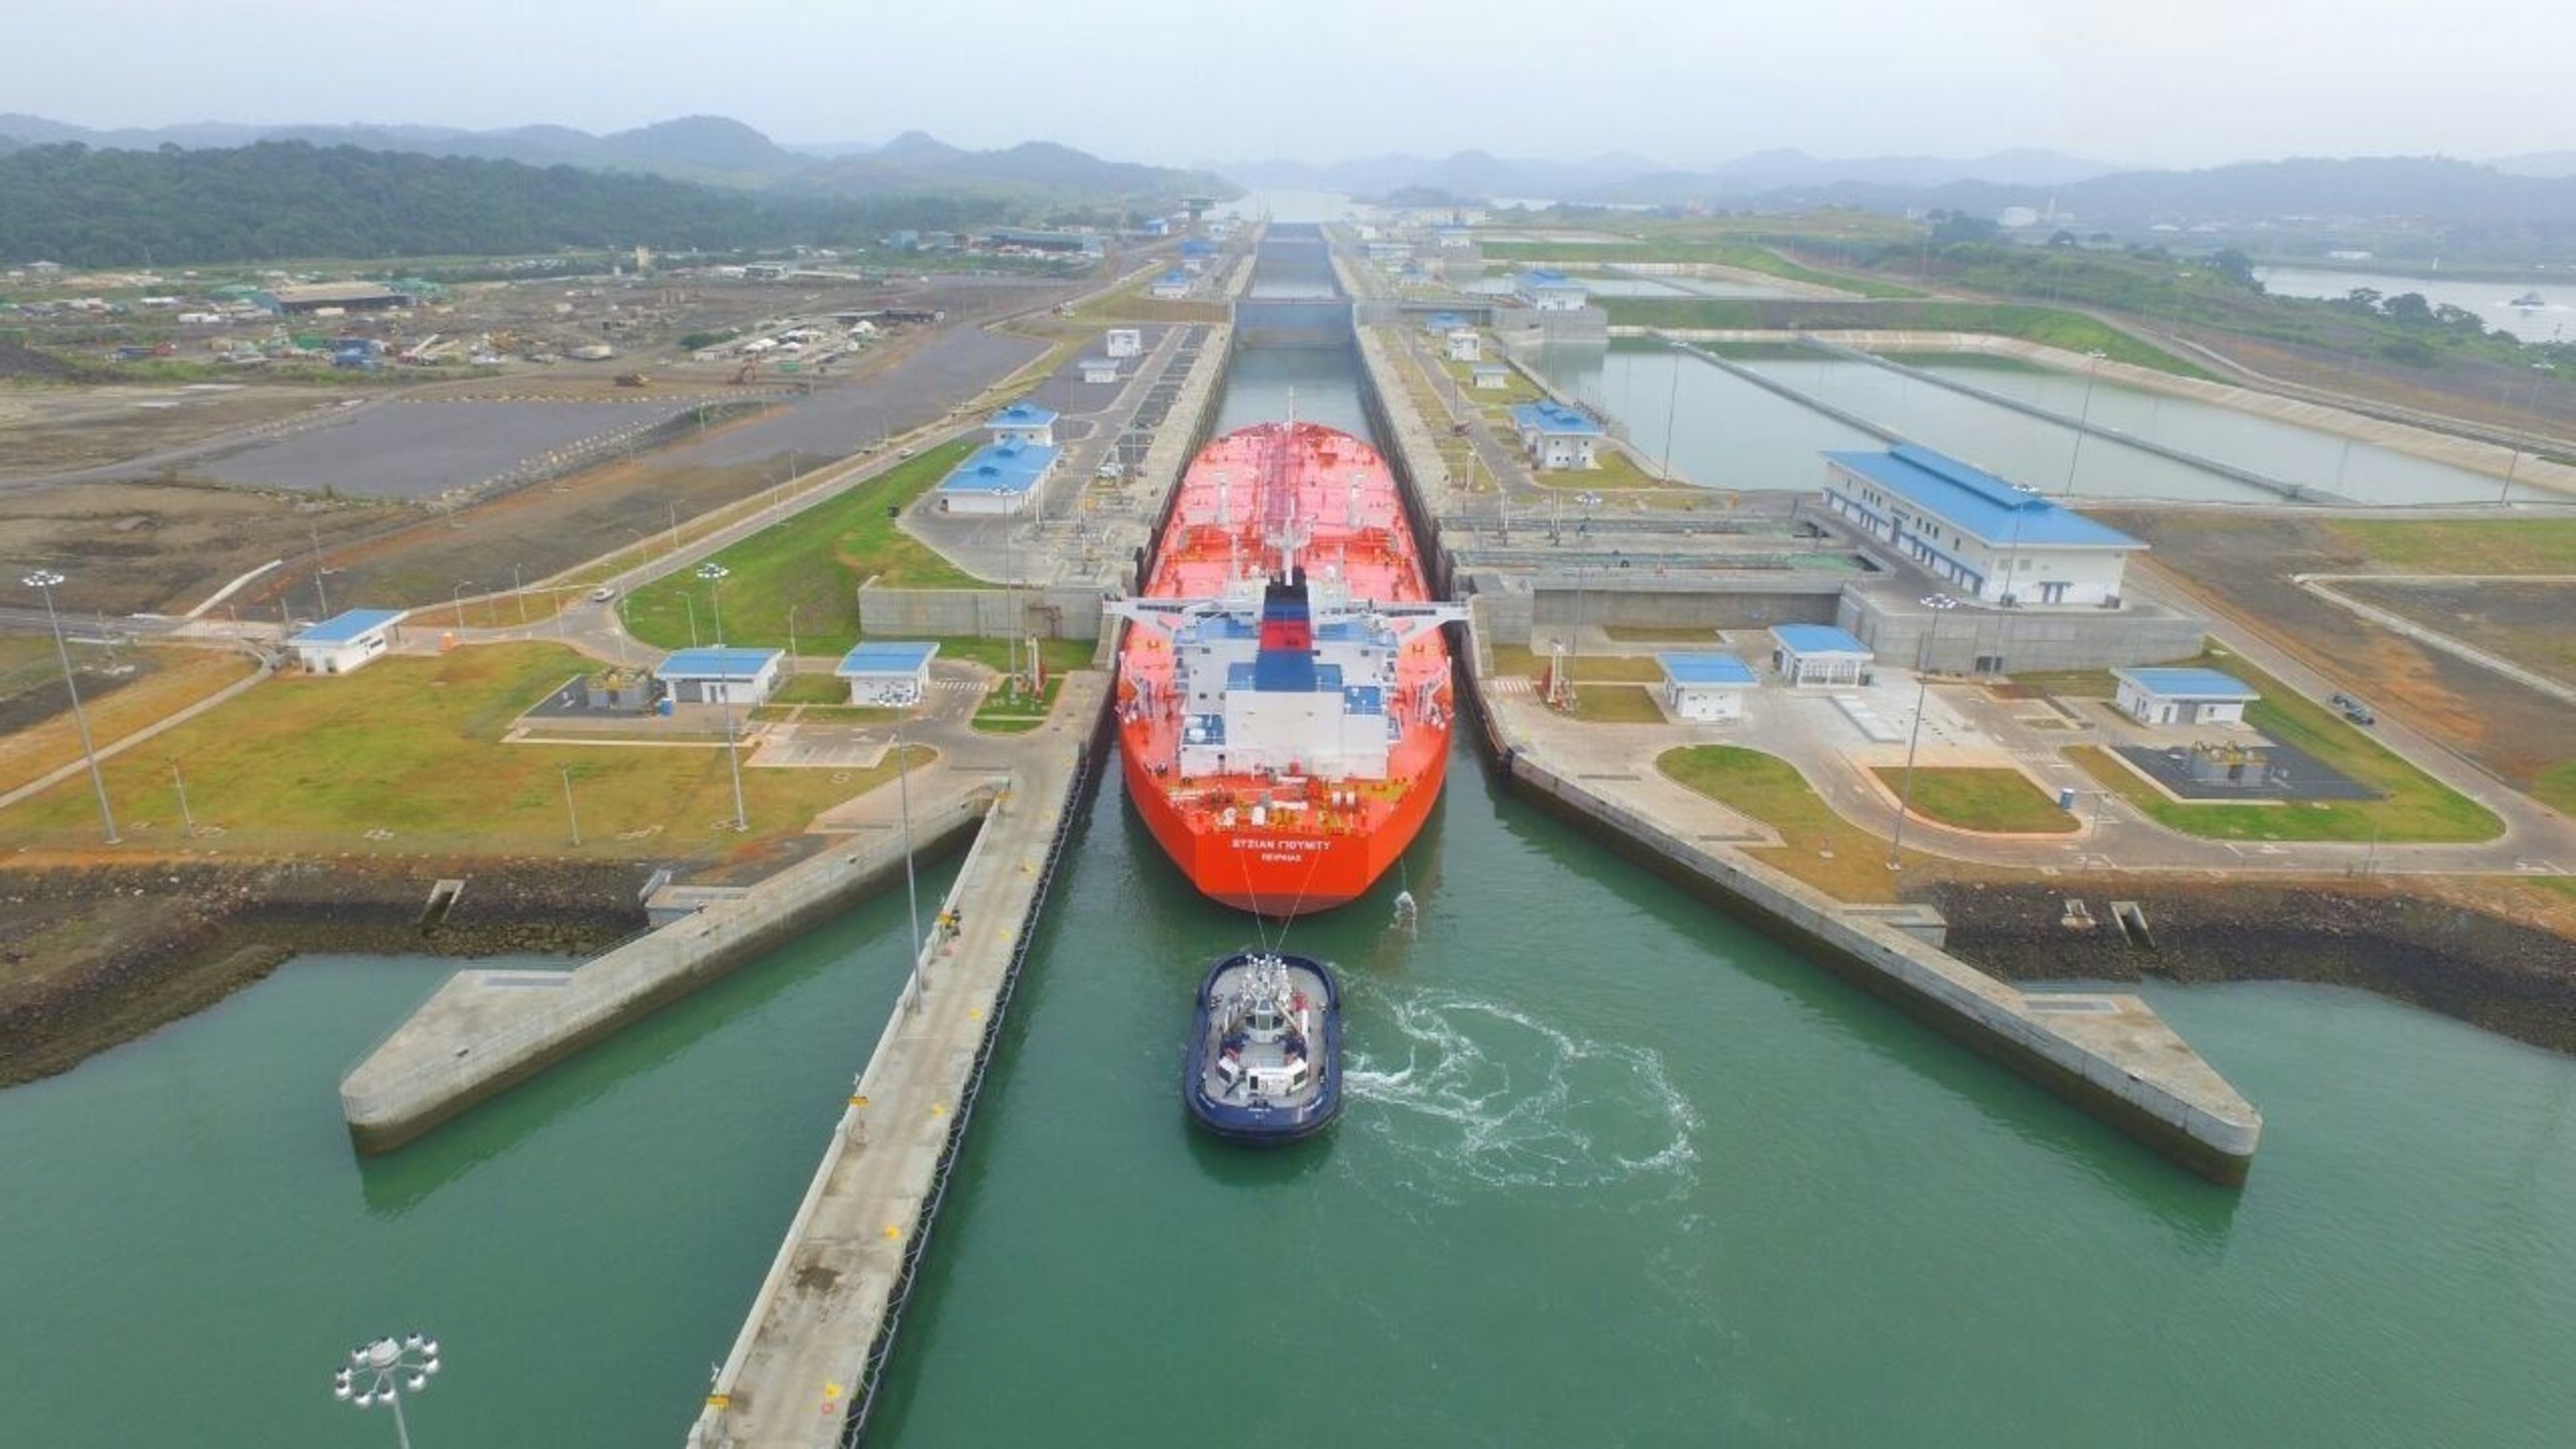 MT Aegean Unity transits the new Panama Canal on August 18, 2016.